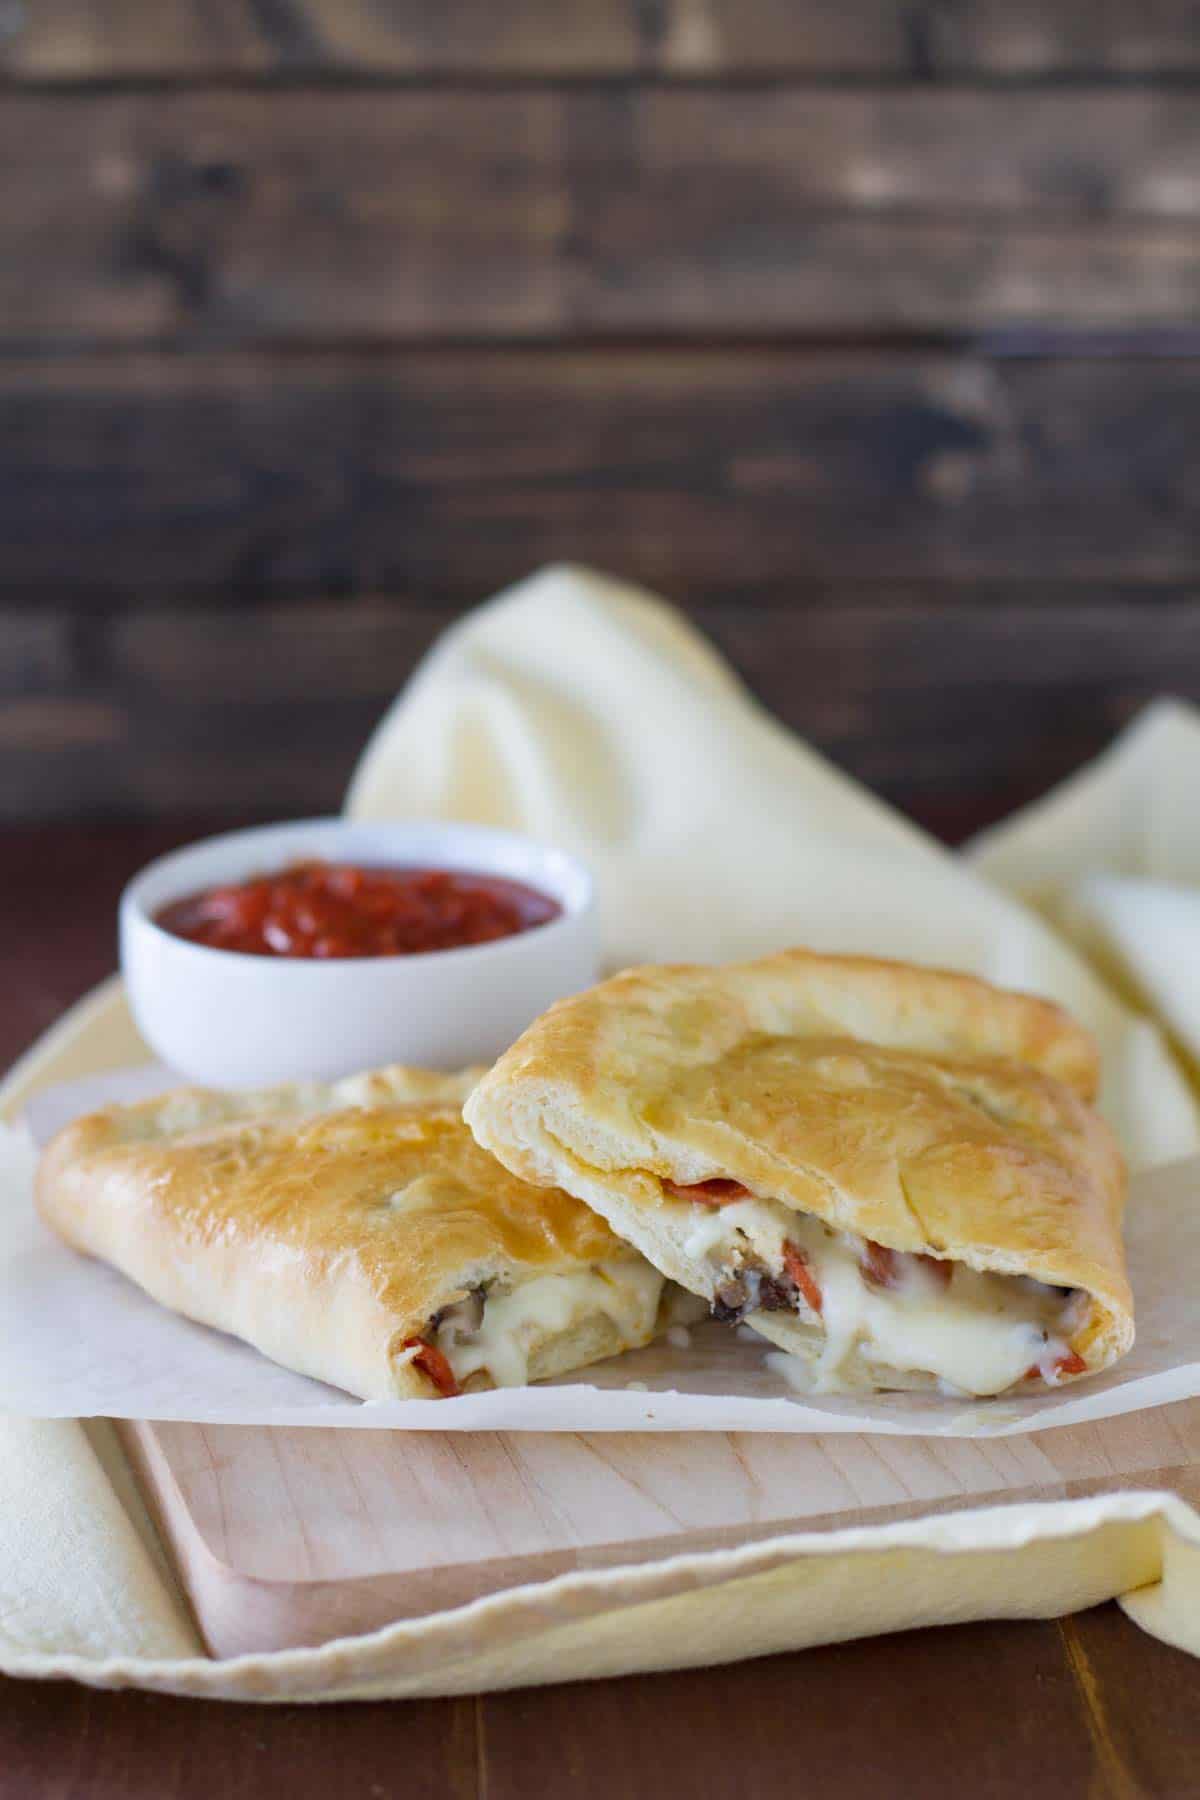 Italian Calzones Recipe filled with ricotta, cheese, pepperoni and sausage